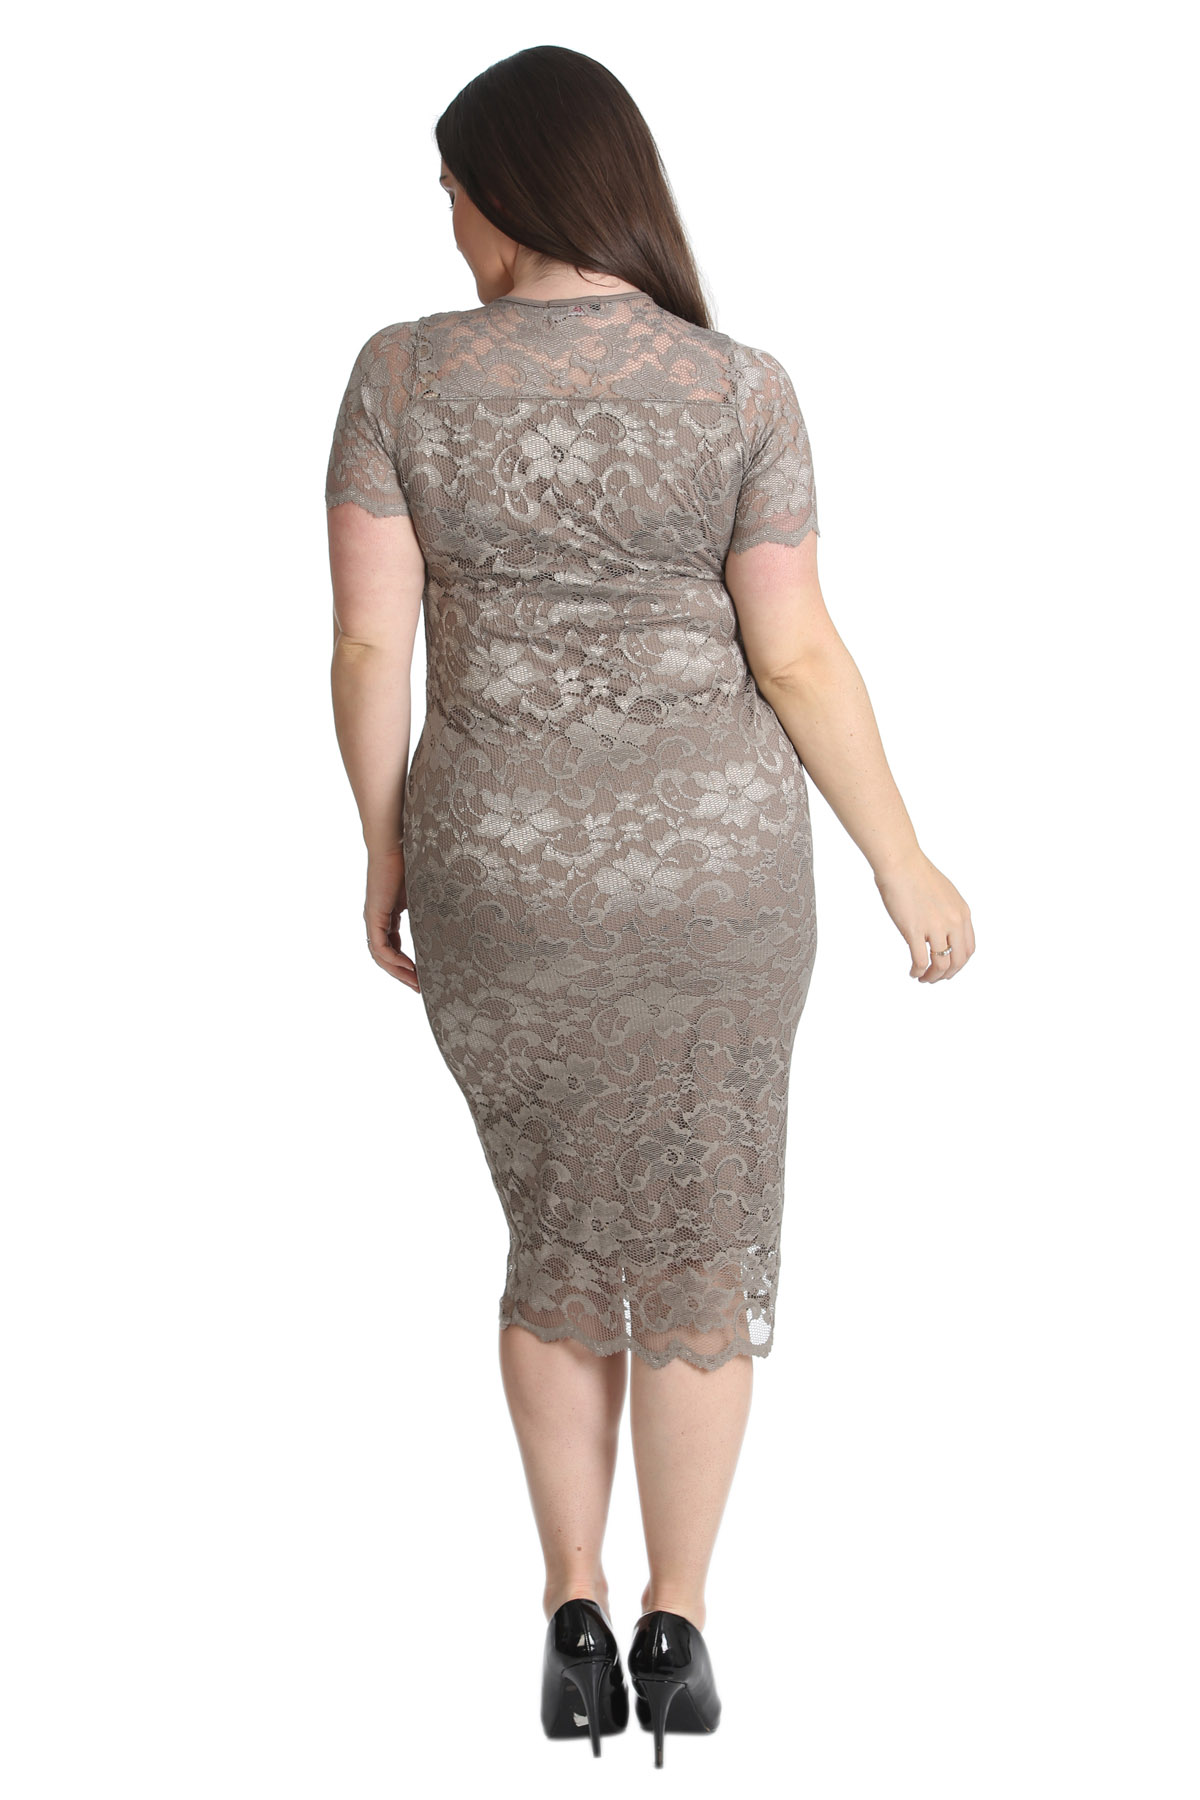 Womens New Dress Ladies Plus Size Lace Bodycon Floral Midi Sweetheart ...